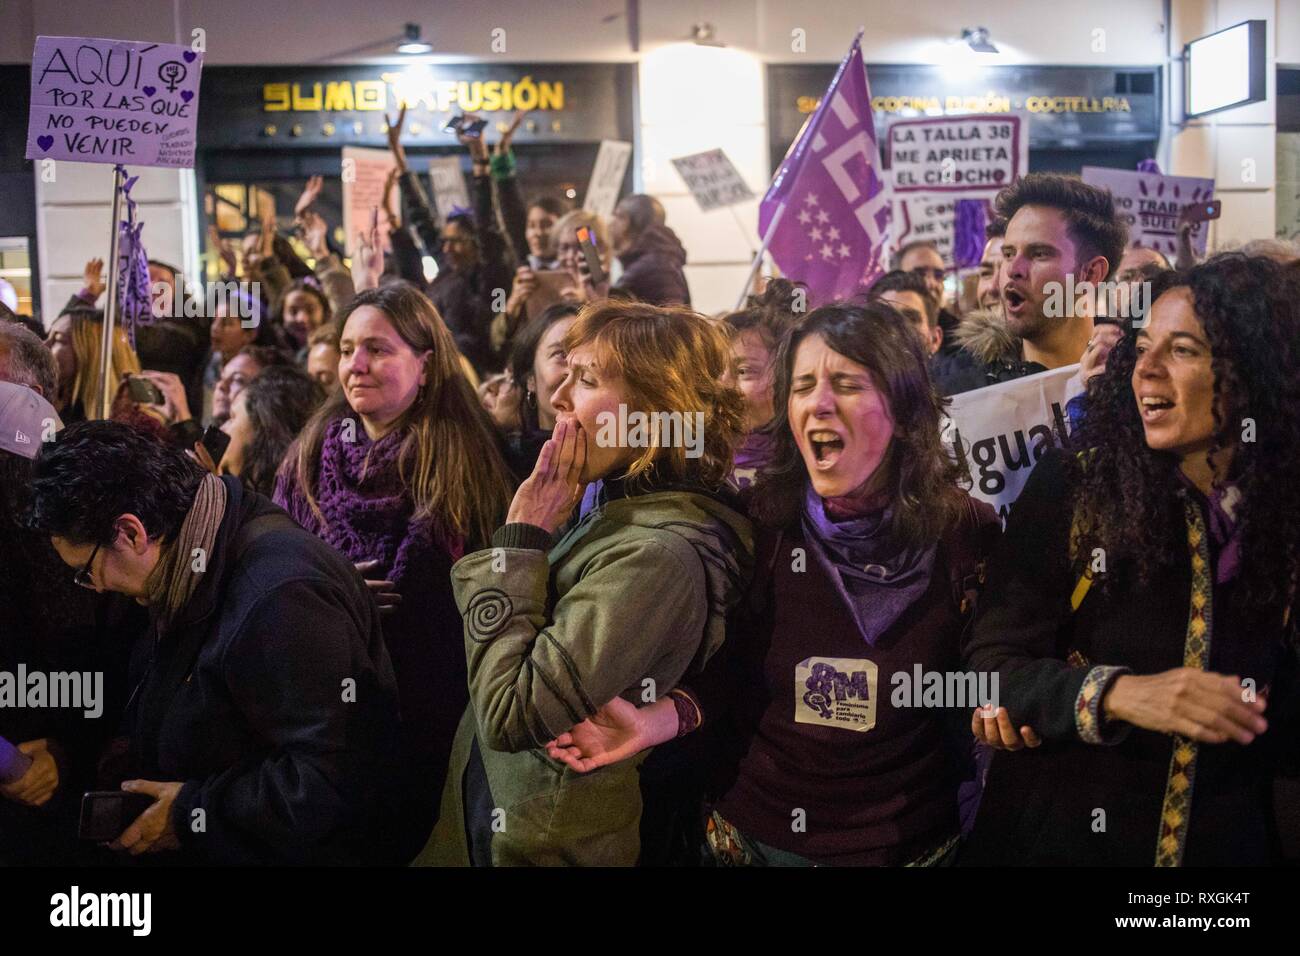 Protesters are seen shouting slogans during the demonstration. Feminist protest demanding for women rights during the International Women's Day in Madrid. According to the authorities, the estimation of more than 350,000 people have participated in the protest. Stock Photo